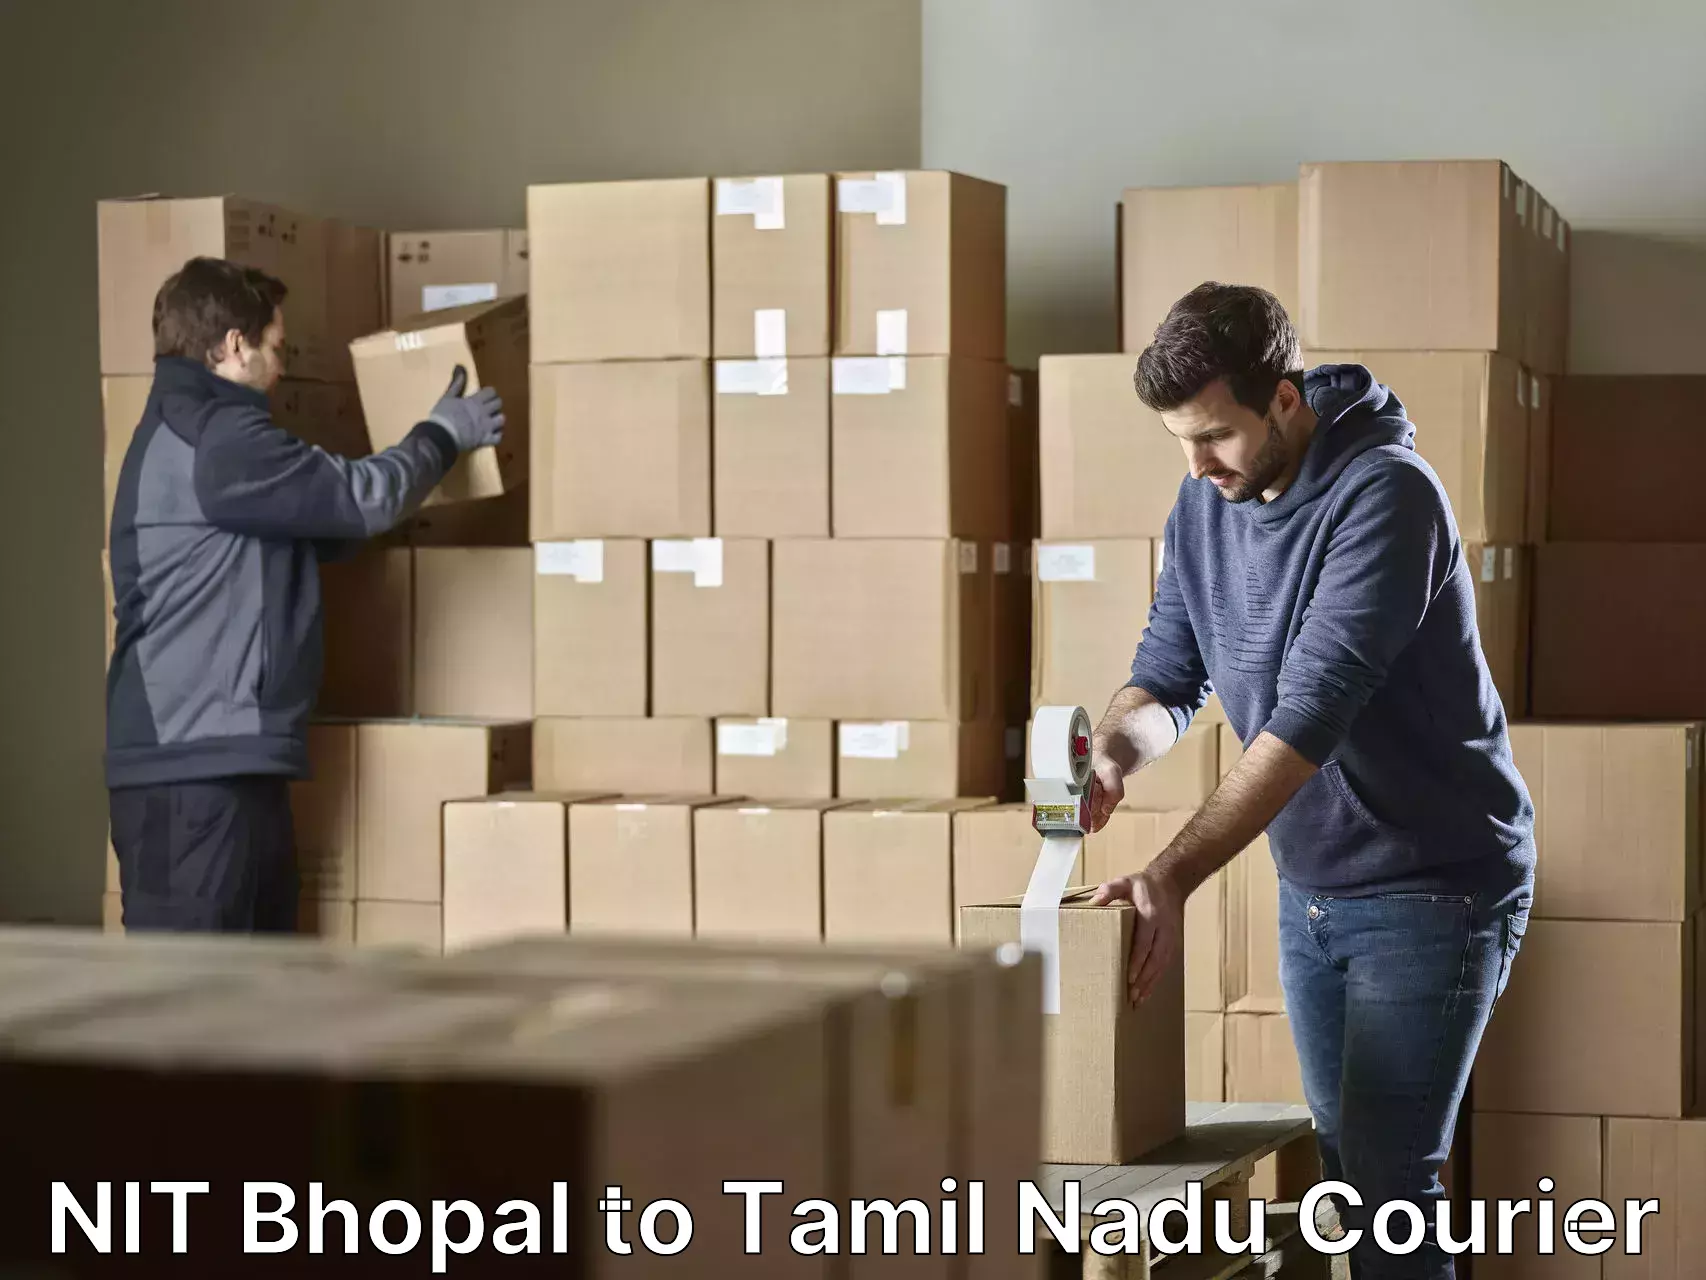 Moving and handling services NIT Bhopal to Ennore Port Chennai